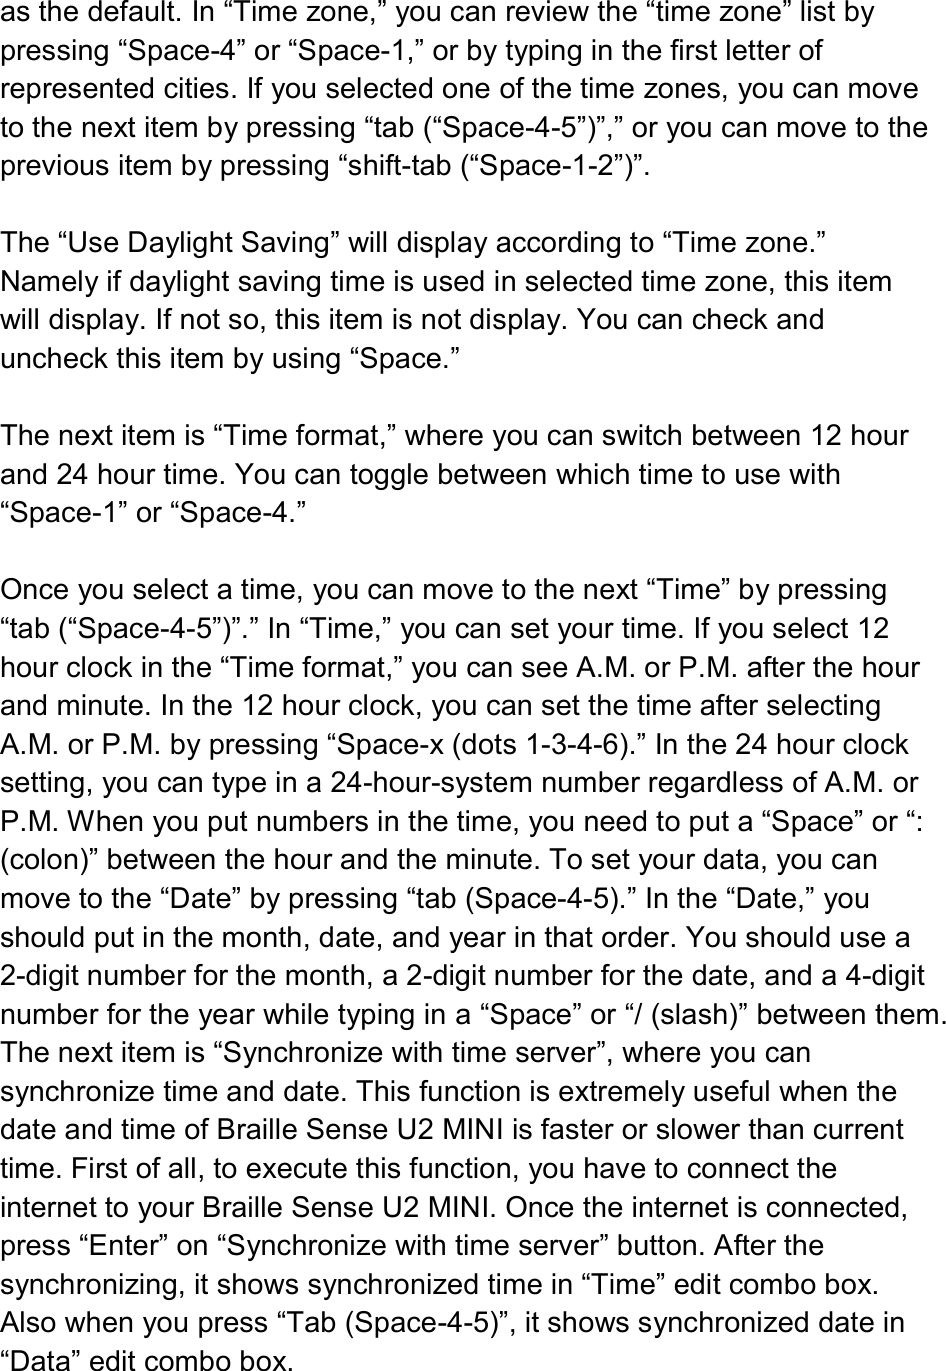  as the default. In “Time zone,” you can review the “time zone” list by pressing “Space-4” or “Space-1,” or by typing in the first letter of represented cities. If you selected one of the time zones, you can move to the next item by pressing “tab (“Space-4-5”)”,” or you can move to the previous item by pressing “shift-tab (“Space-1-2”)”.  The “Use Daylight Saving” will display according to “Time zone.” Namely if daylight saving time is used in selected time zone, this item will display. If not so, this item is not display. You can check and uncheck this item by using “Space.”  The next item is “Time format,” where you can switch between 12 hour and 24 hour time. You can toggle between which time to use with “Space-1” or “Space-4.”    Once you select a time, you can move to the next “Time” by pressing “tab (“Space-4-5”)”.” In “Time,” you can set your time. If you select 12 hour clock in the “Time format,” you can see A.M. or P.M. after the hour and minute. In the 12 hour clock, you can set the time after selecting A.M. or P.M. by pressing “Space-x (dots 1-3-4-6).” In the 24 hour clock setting, you can type in a 24-hour-system number regardless of A.M. or P.M. When you put numbers in the time, you need to put a “Space” or “: (colon)” between the hour and the minute. To set your data, you can move to the “Date” by pressing “tab (Space-4-5).” In the “Date,” you should put in the month, date, and year in that order. You should use a 2-digit number for the month, a 2-digit number for the date, and a 4-digit number for the year while typing in a “Space” or “/ (slash)” between them.   The next item is “Synchronize with time server”, where you can synchronize time and date. This function is extremely useful when the date and time of Braille Sense U2 MINI is faster or slower than current time. First of all, to execute this function, you have to connect the internet to your Braille Sense U2 MINI. Once the internet is connected, press “Enter” on “Synchronize with time server” button. After the synchronizing, it shows synchronized time in “Time” edit combo box. Also when you press “Tab (Space-4-5)”, it shows synchronized date in “Data” edit combo box.  